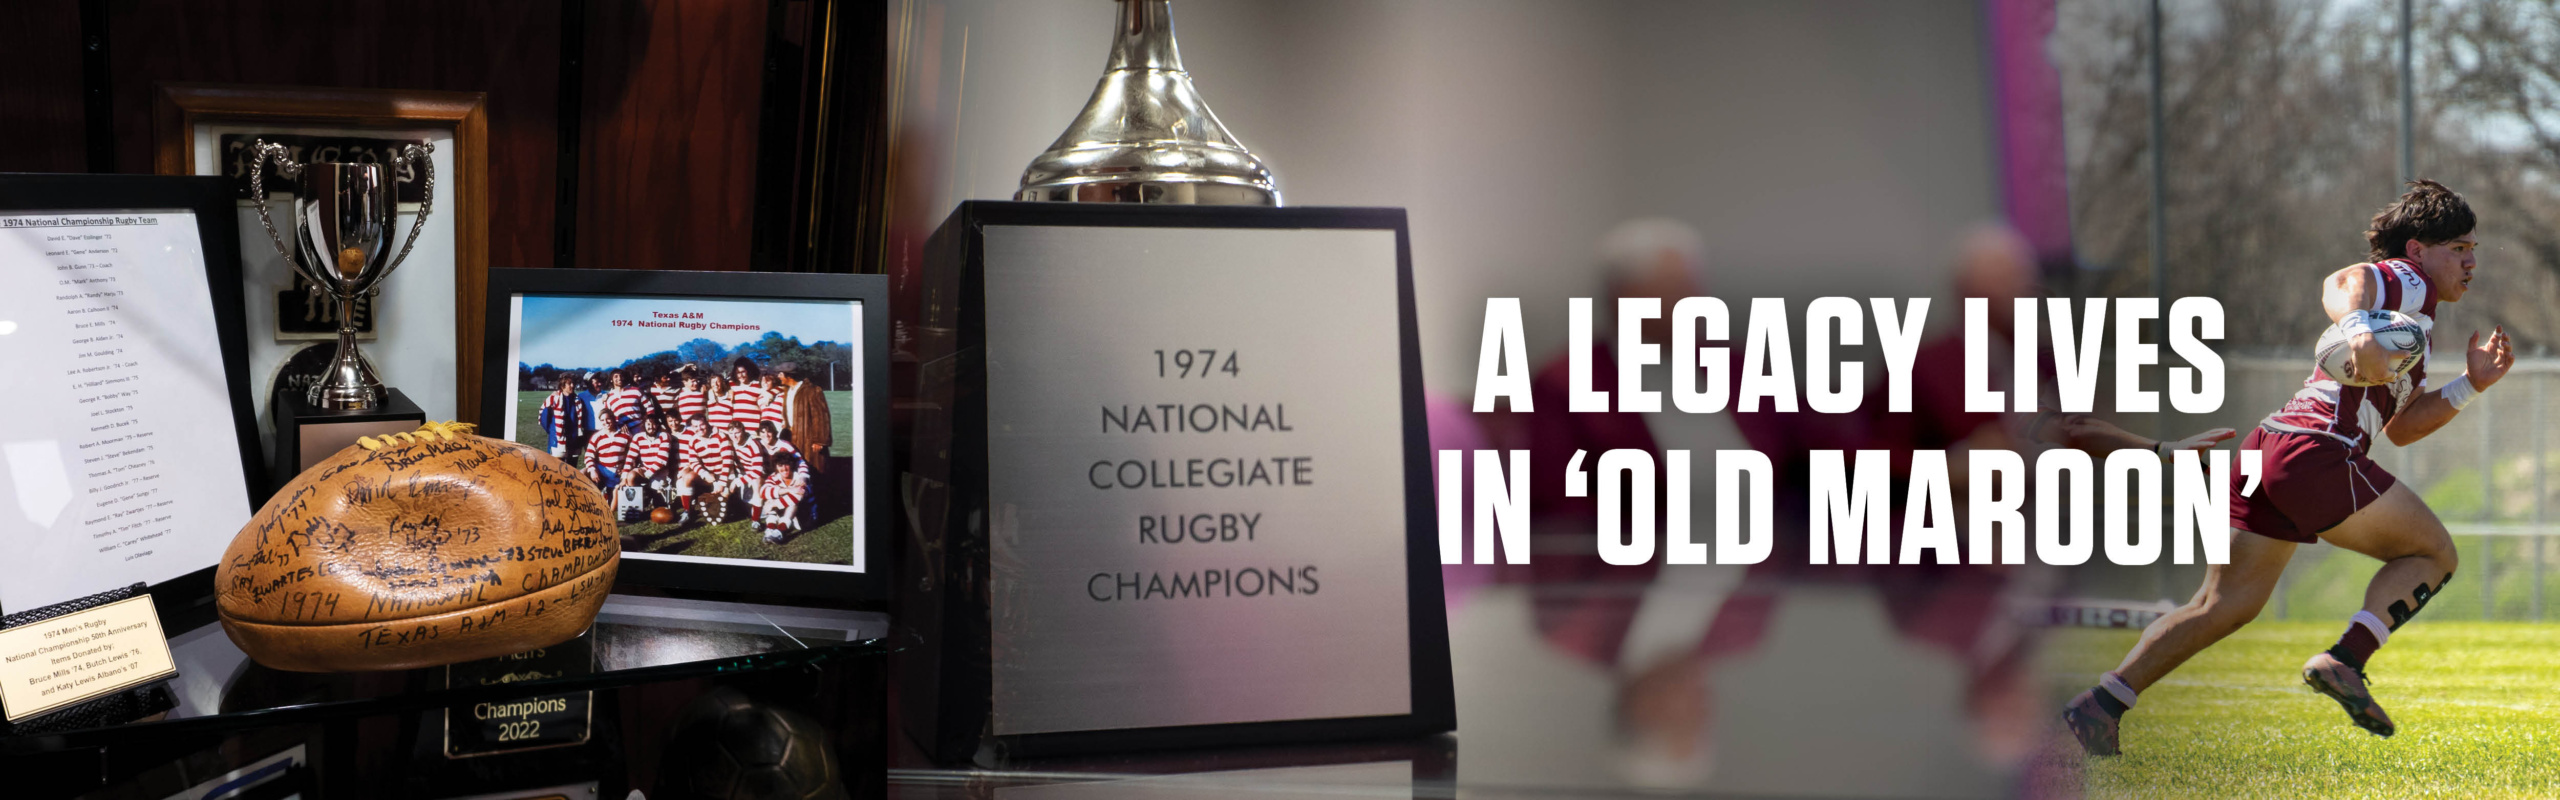 Three photos merged together, the one on the left is a signed football by the alumni rugby players, the middle photo is the rugby trophy, and the photo on the right is of the current rugby team playing the sport. The text over the top says, "A legacy lives in old maroon."